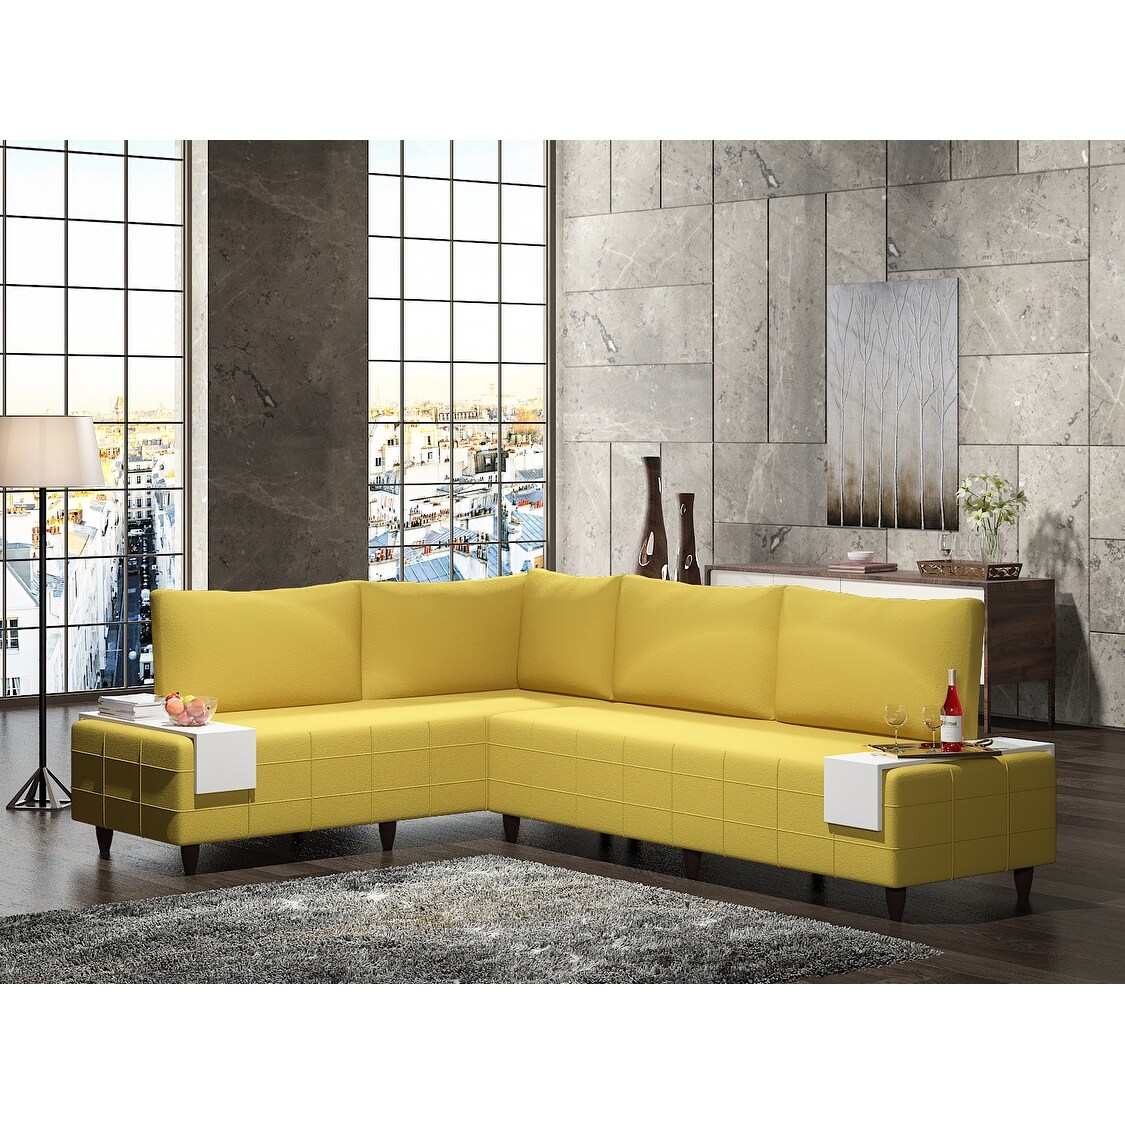 Zhomez Inferno Modern Metal Frame with Foam Seat Sectional Sofa